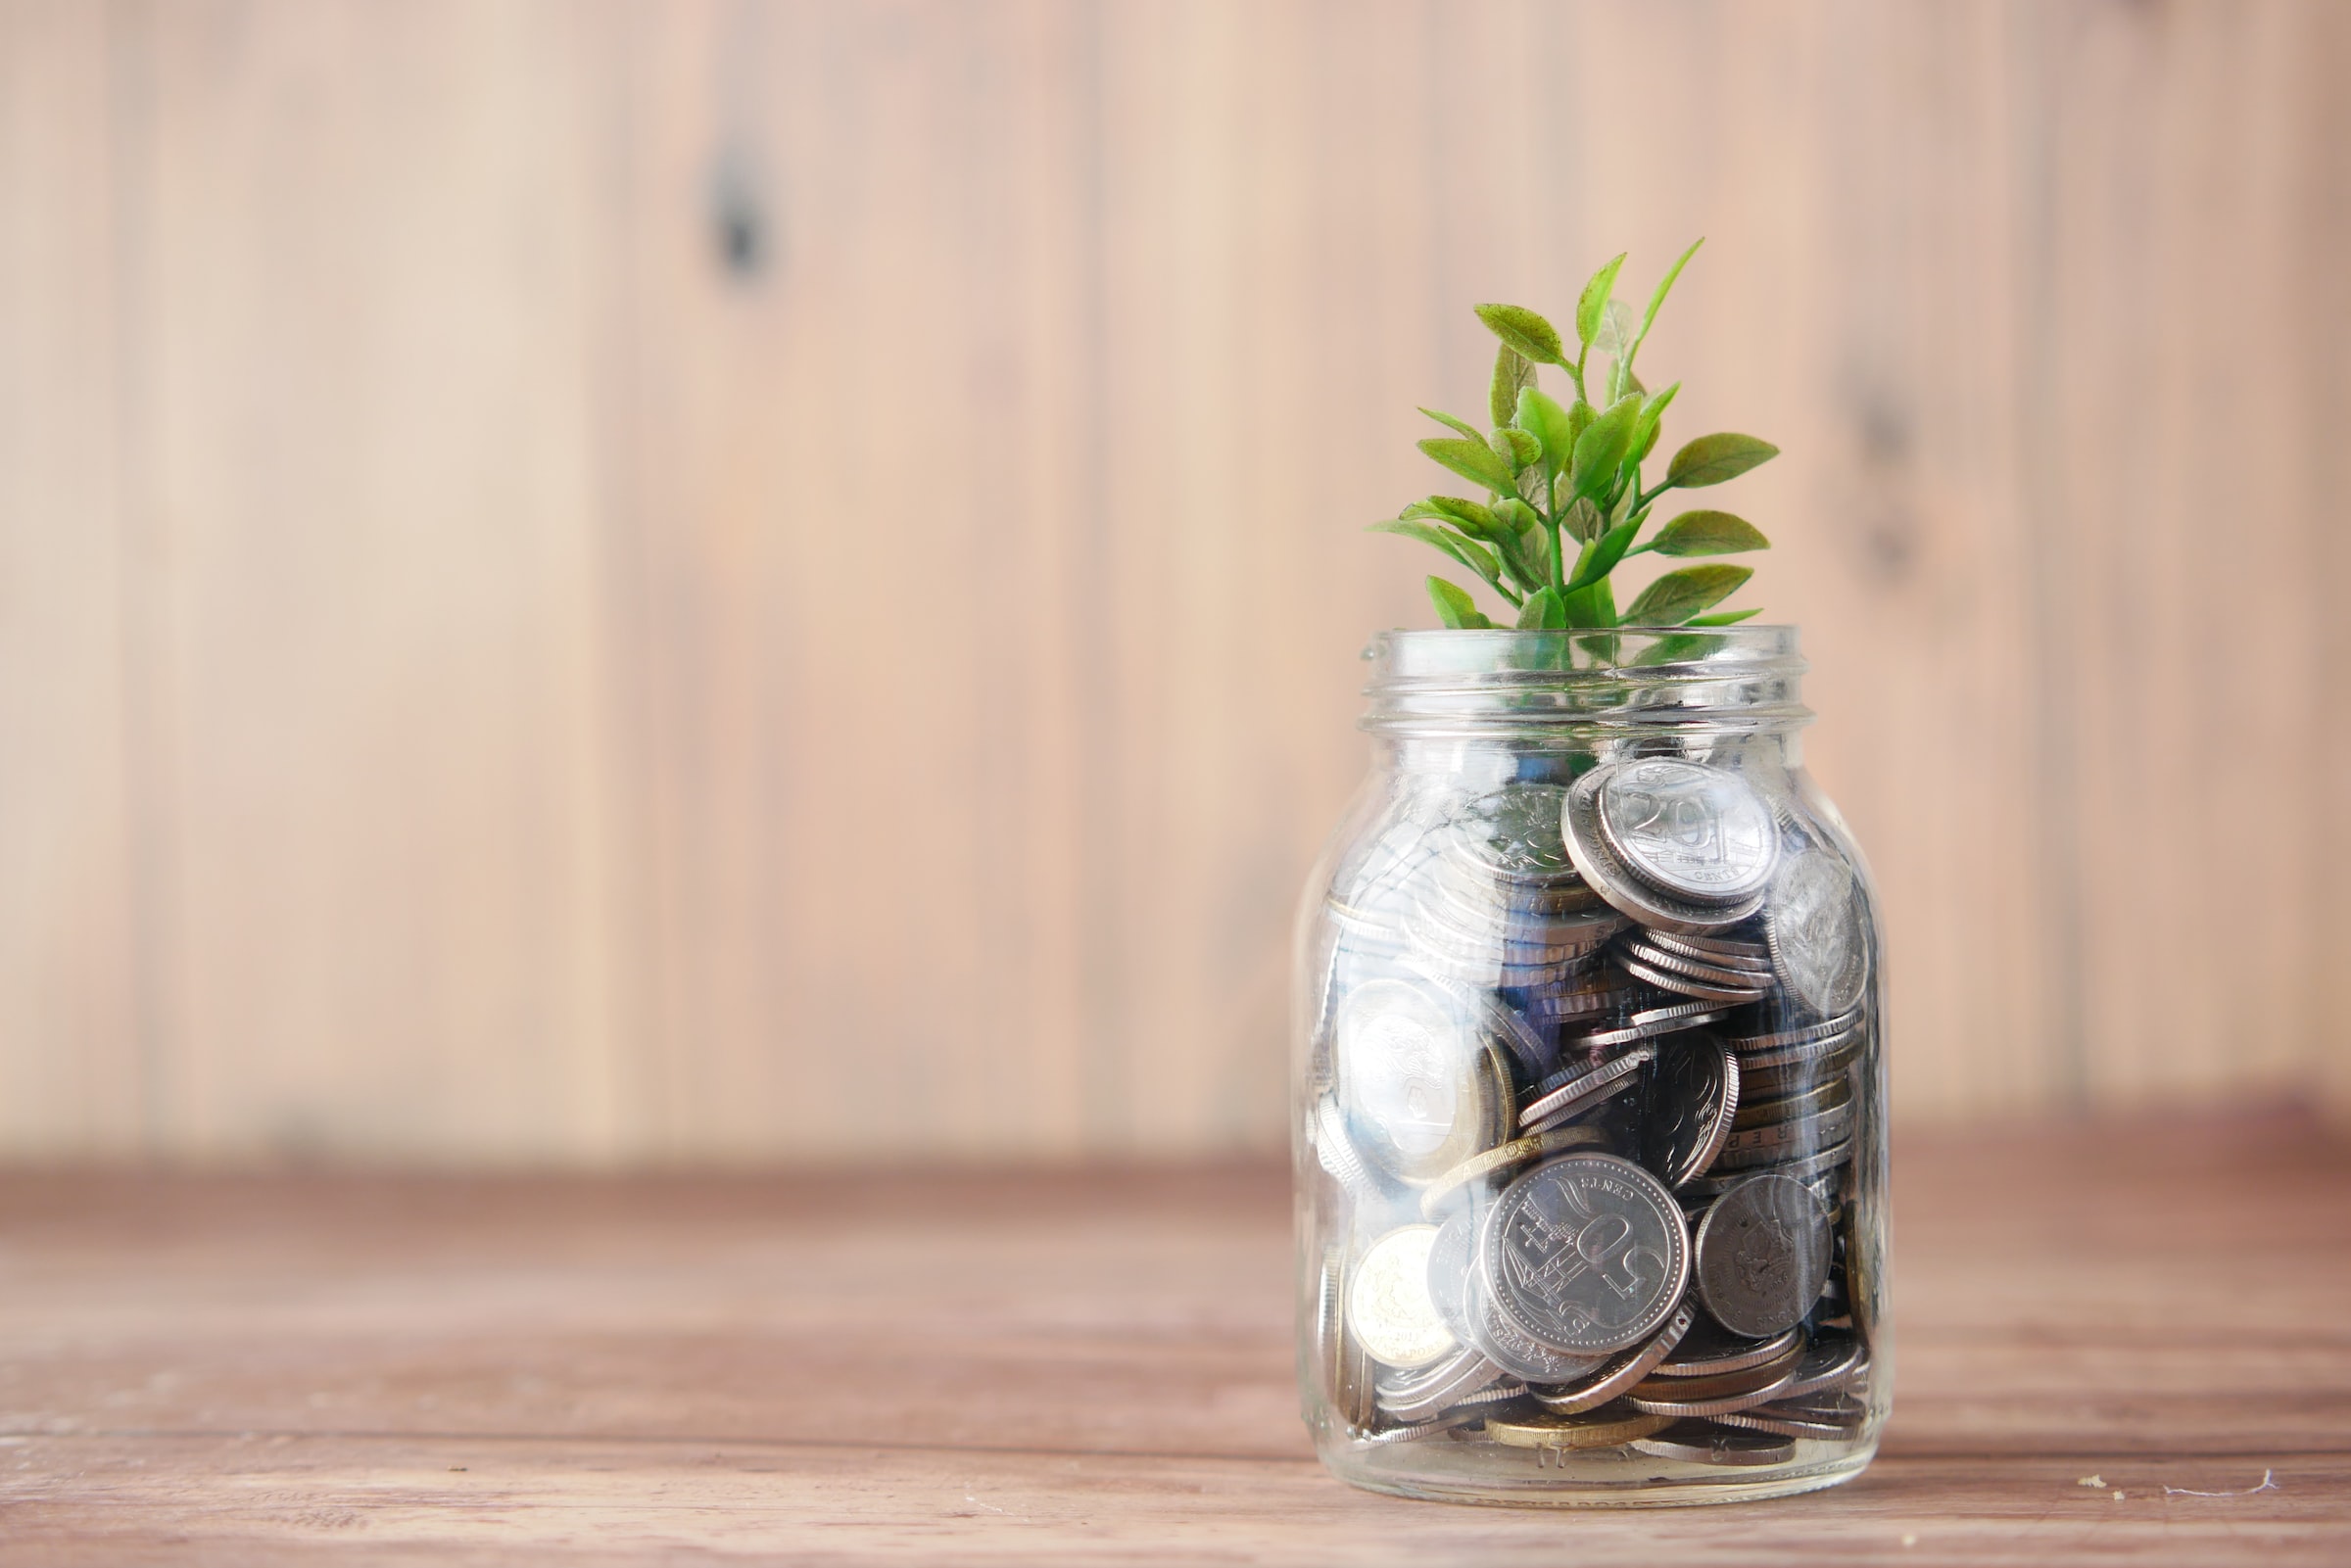 A small plant sprouts out of a glass jar filled with coins